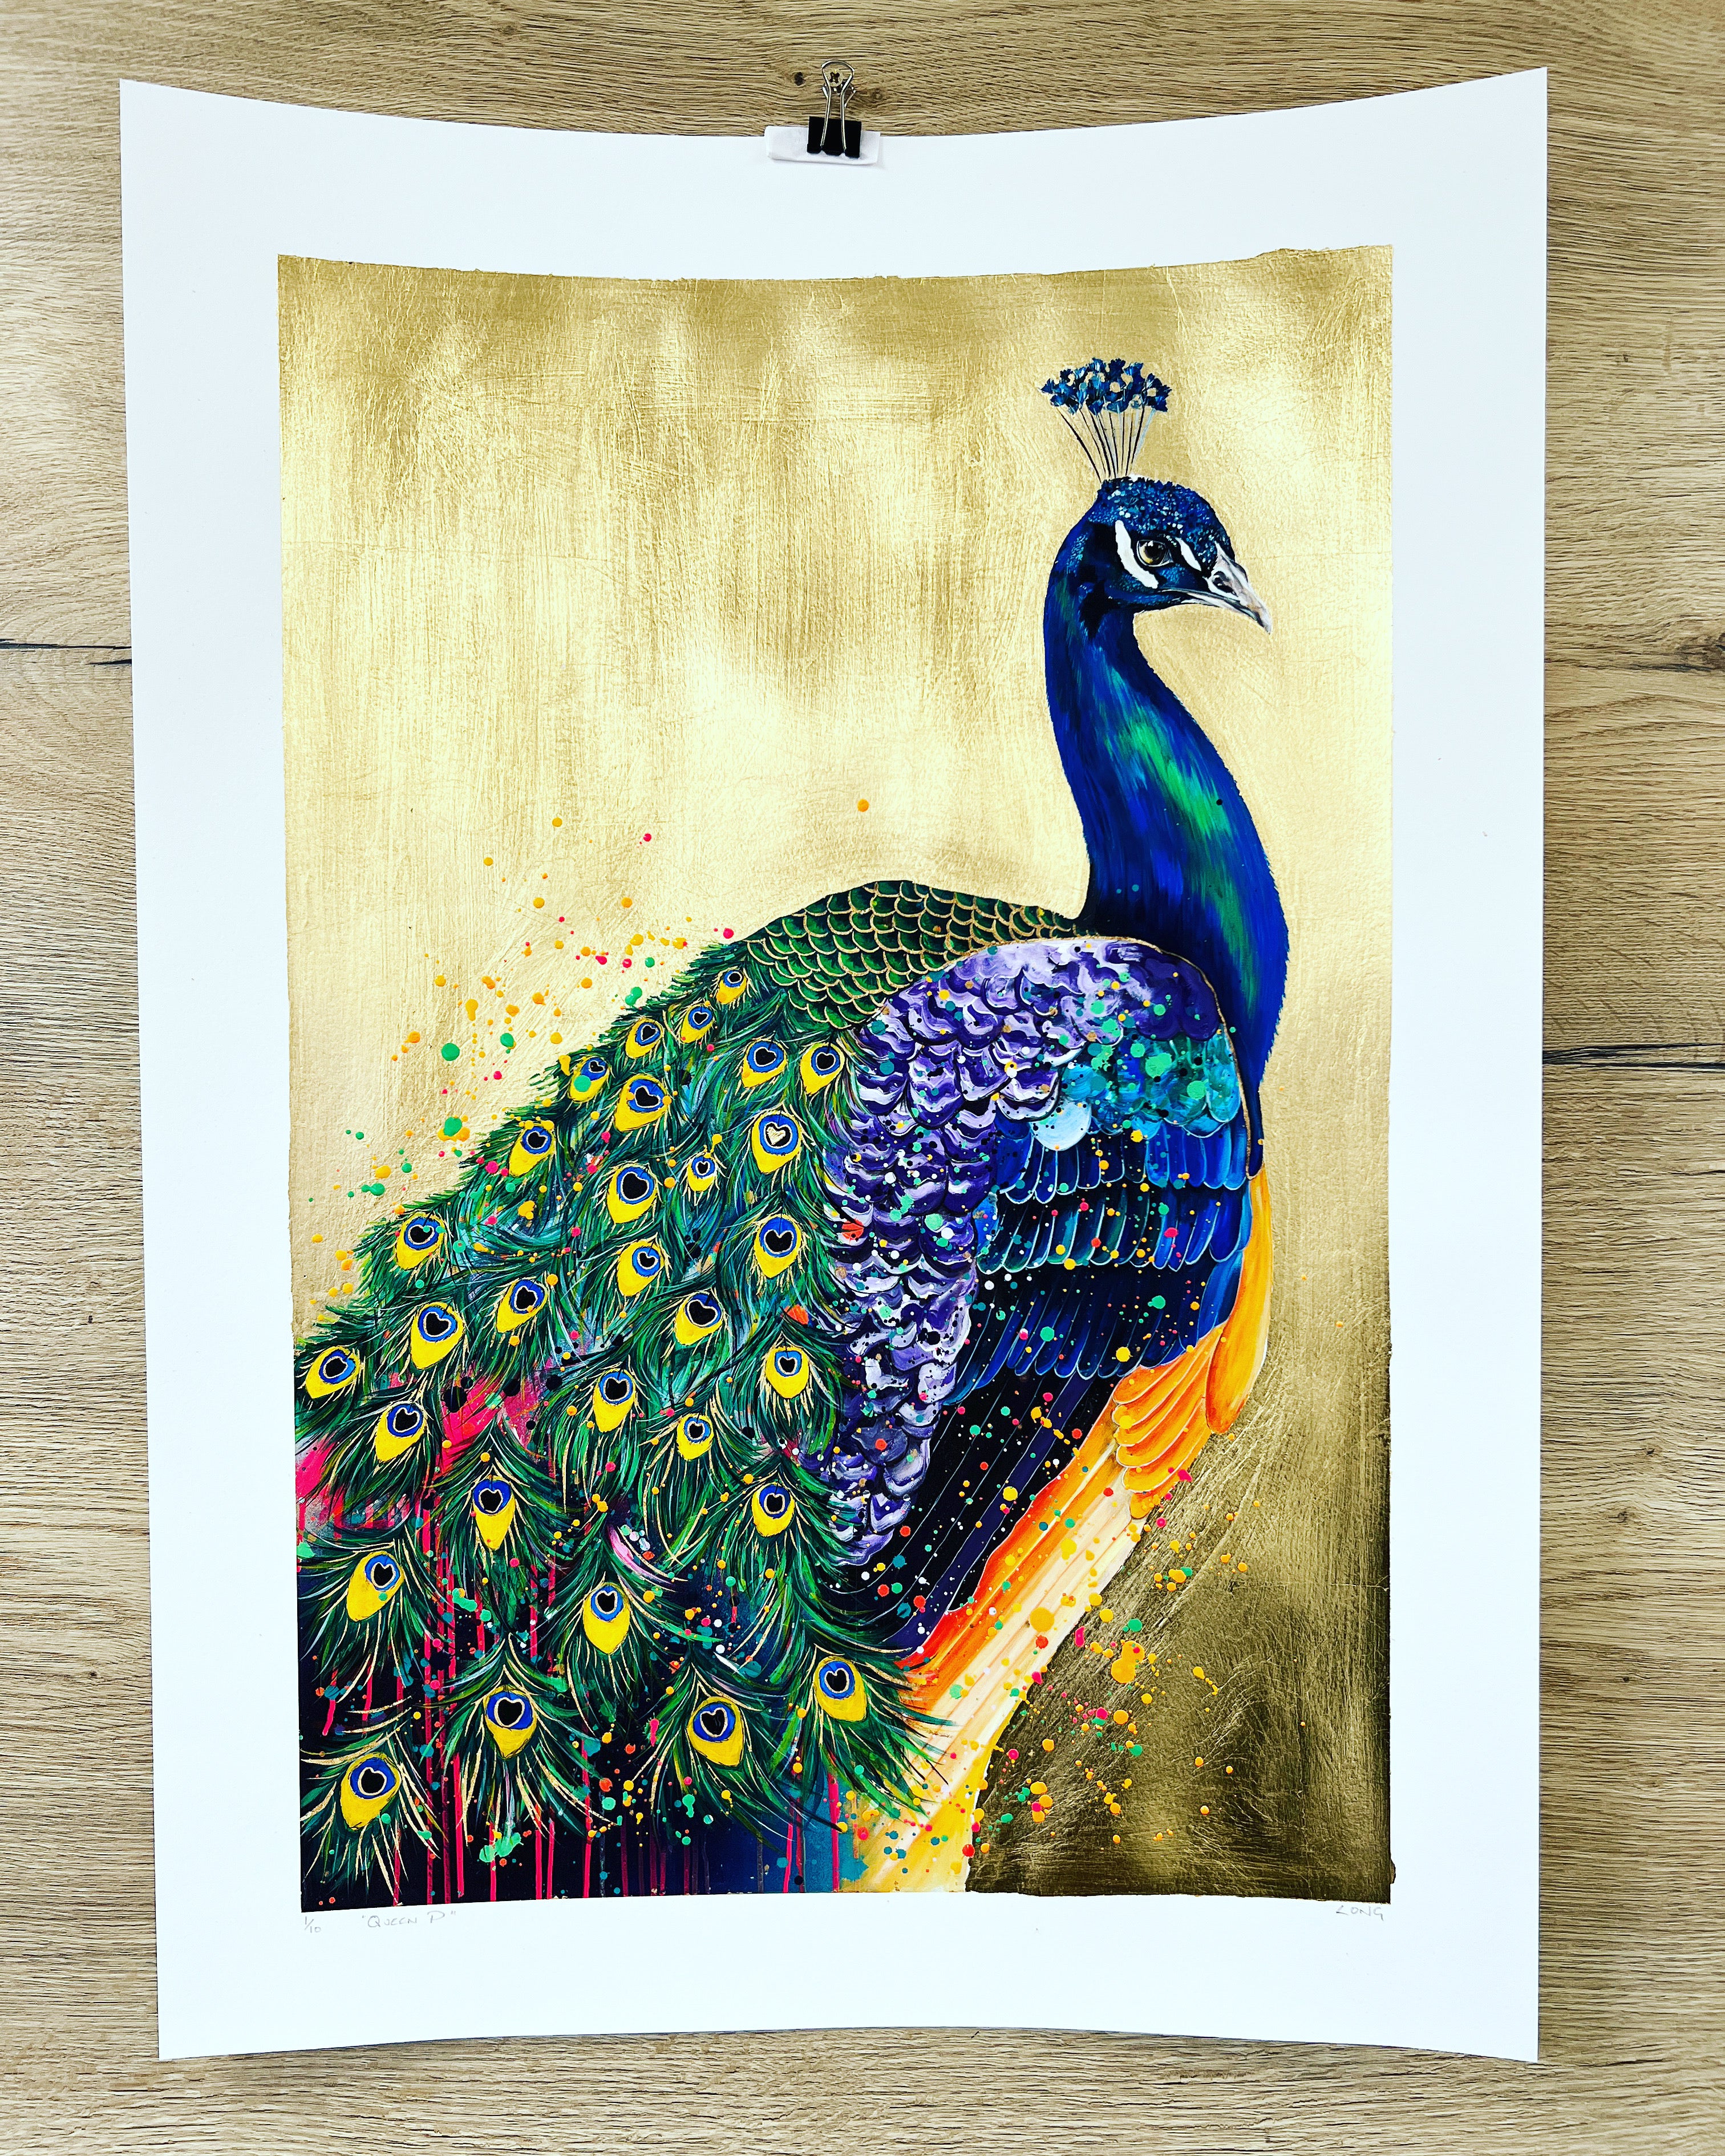 Special Limited Edition Gold Leafed Giclée PRINT – QUEEN P